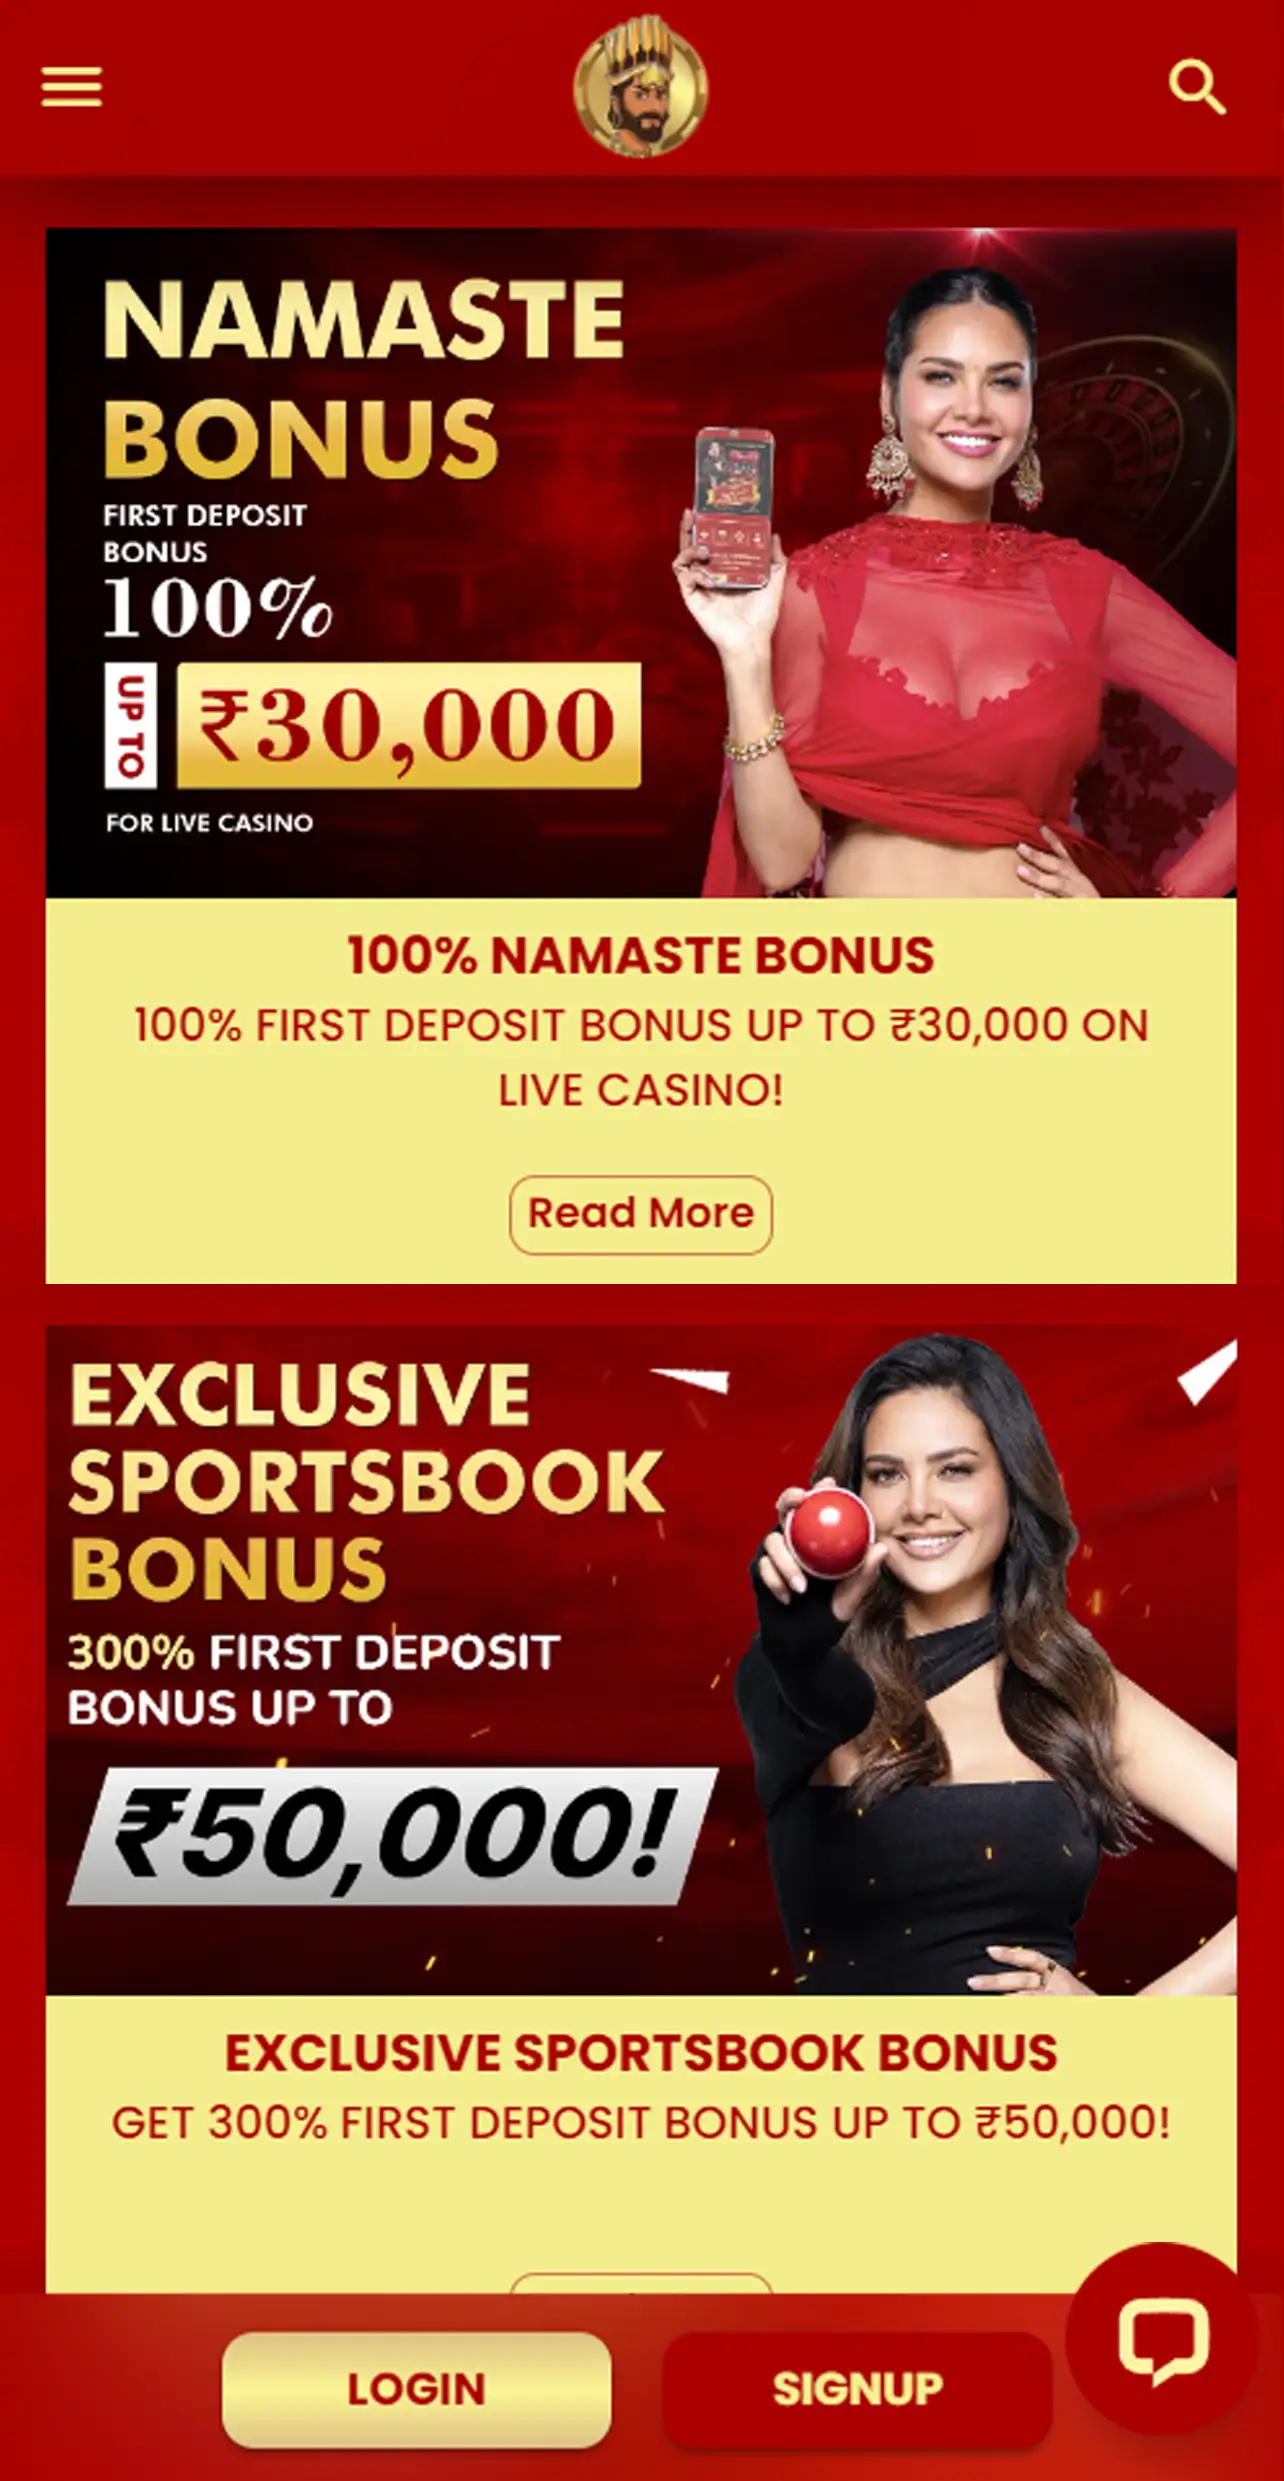 Bonuses and promotions section of the Khelraja app.